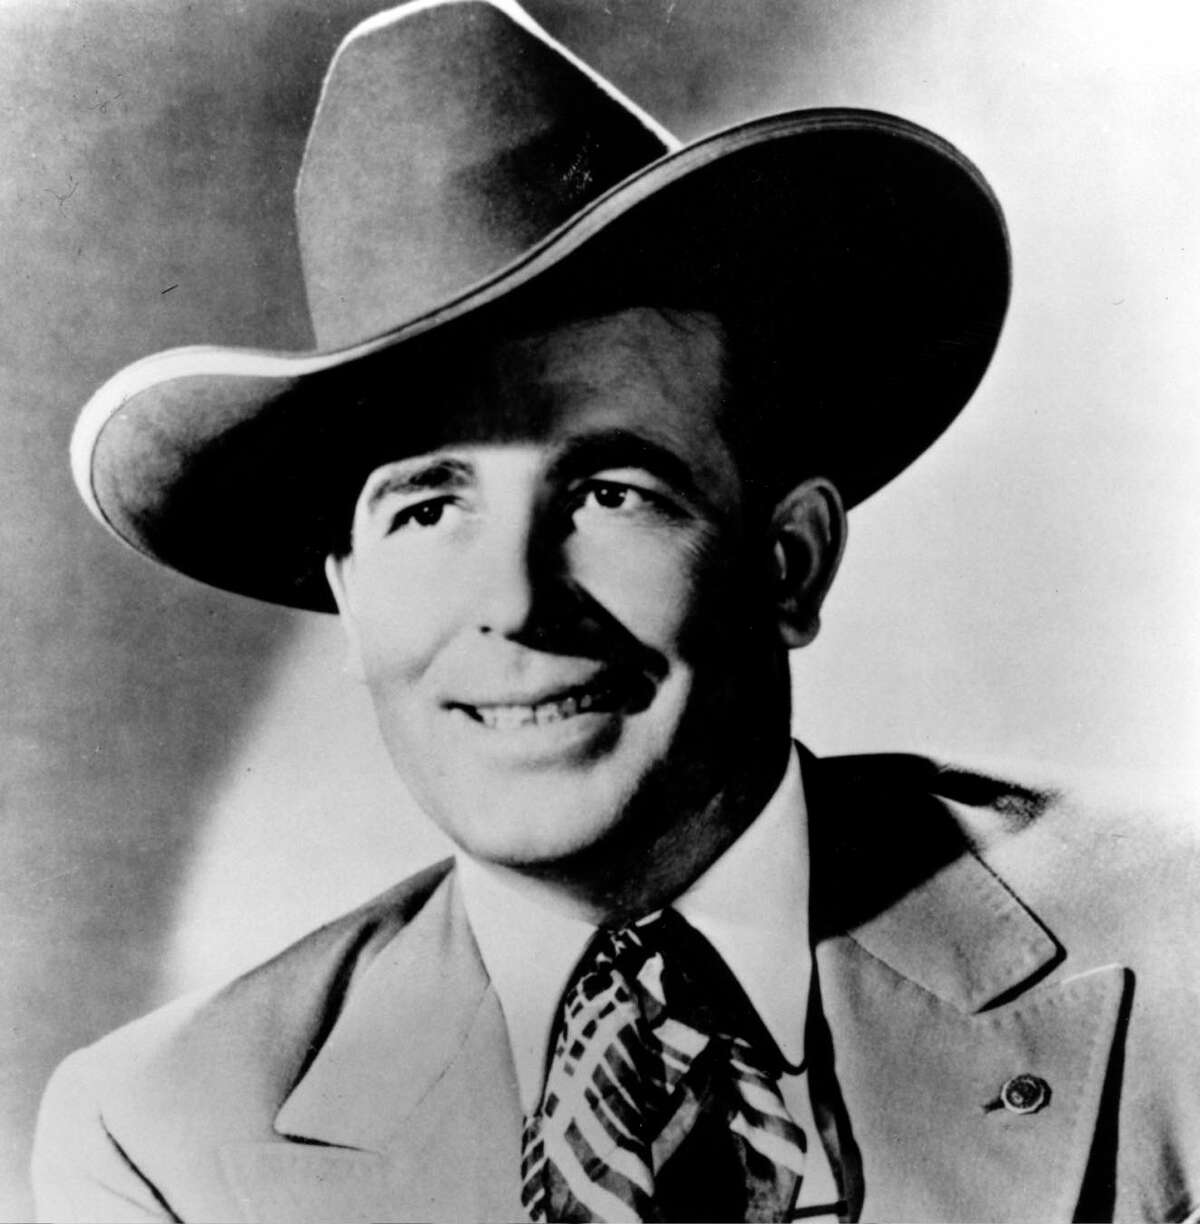 “Across the Alley From the Alamo” Originally penned by The Mills Brothers, it is the Bob Wills version, with all its un-politically correct tones, that most strikes a chord in the hearts of locals.